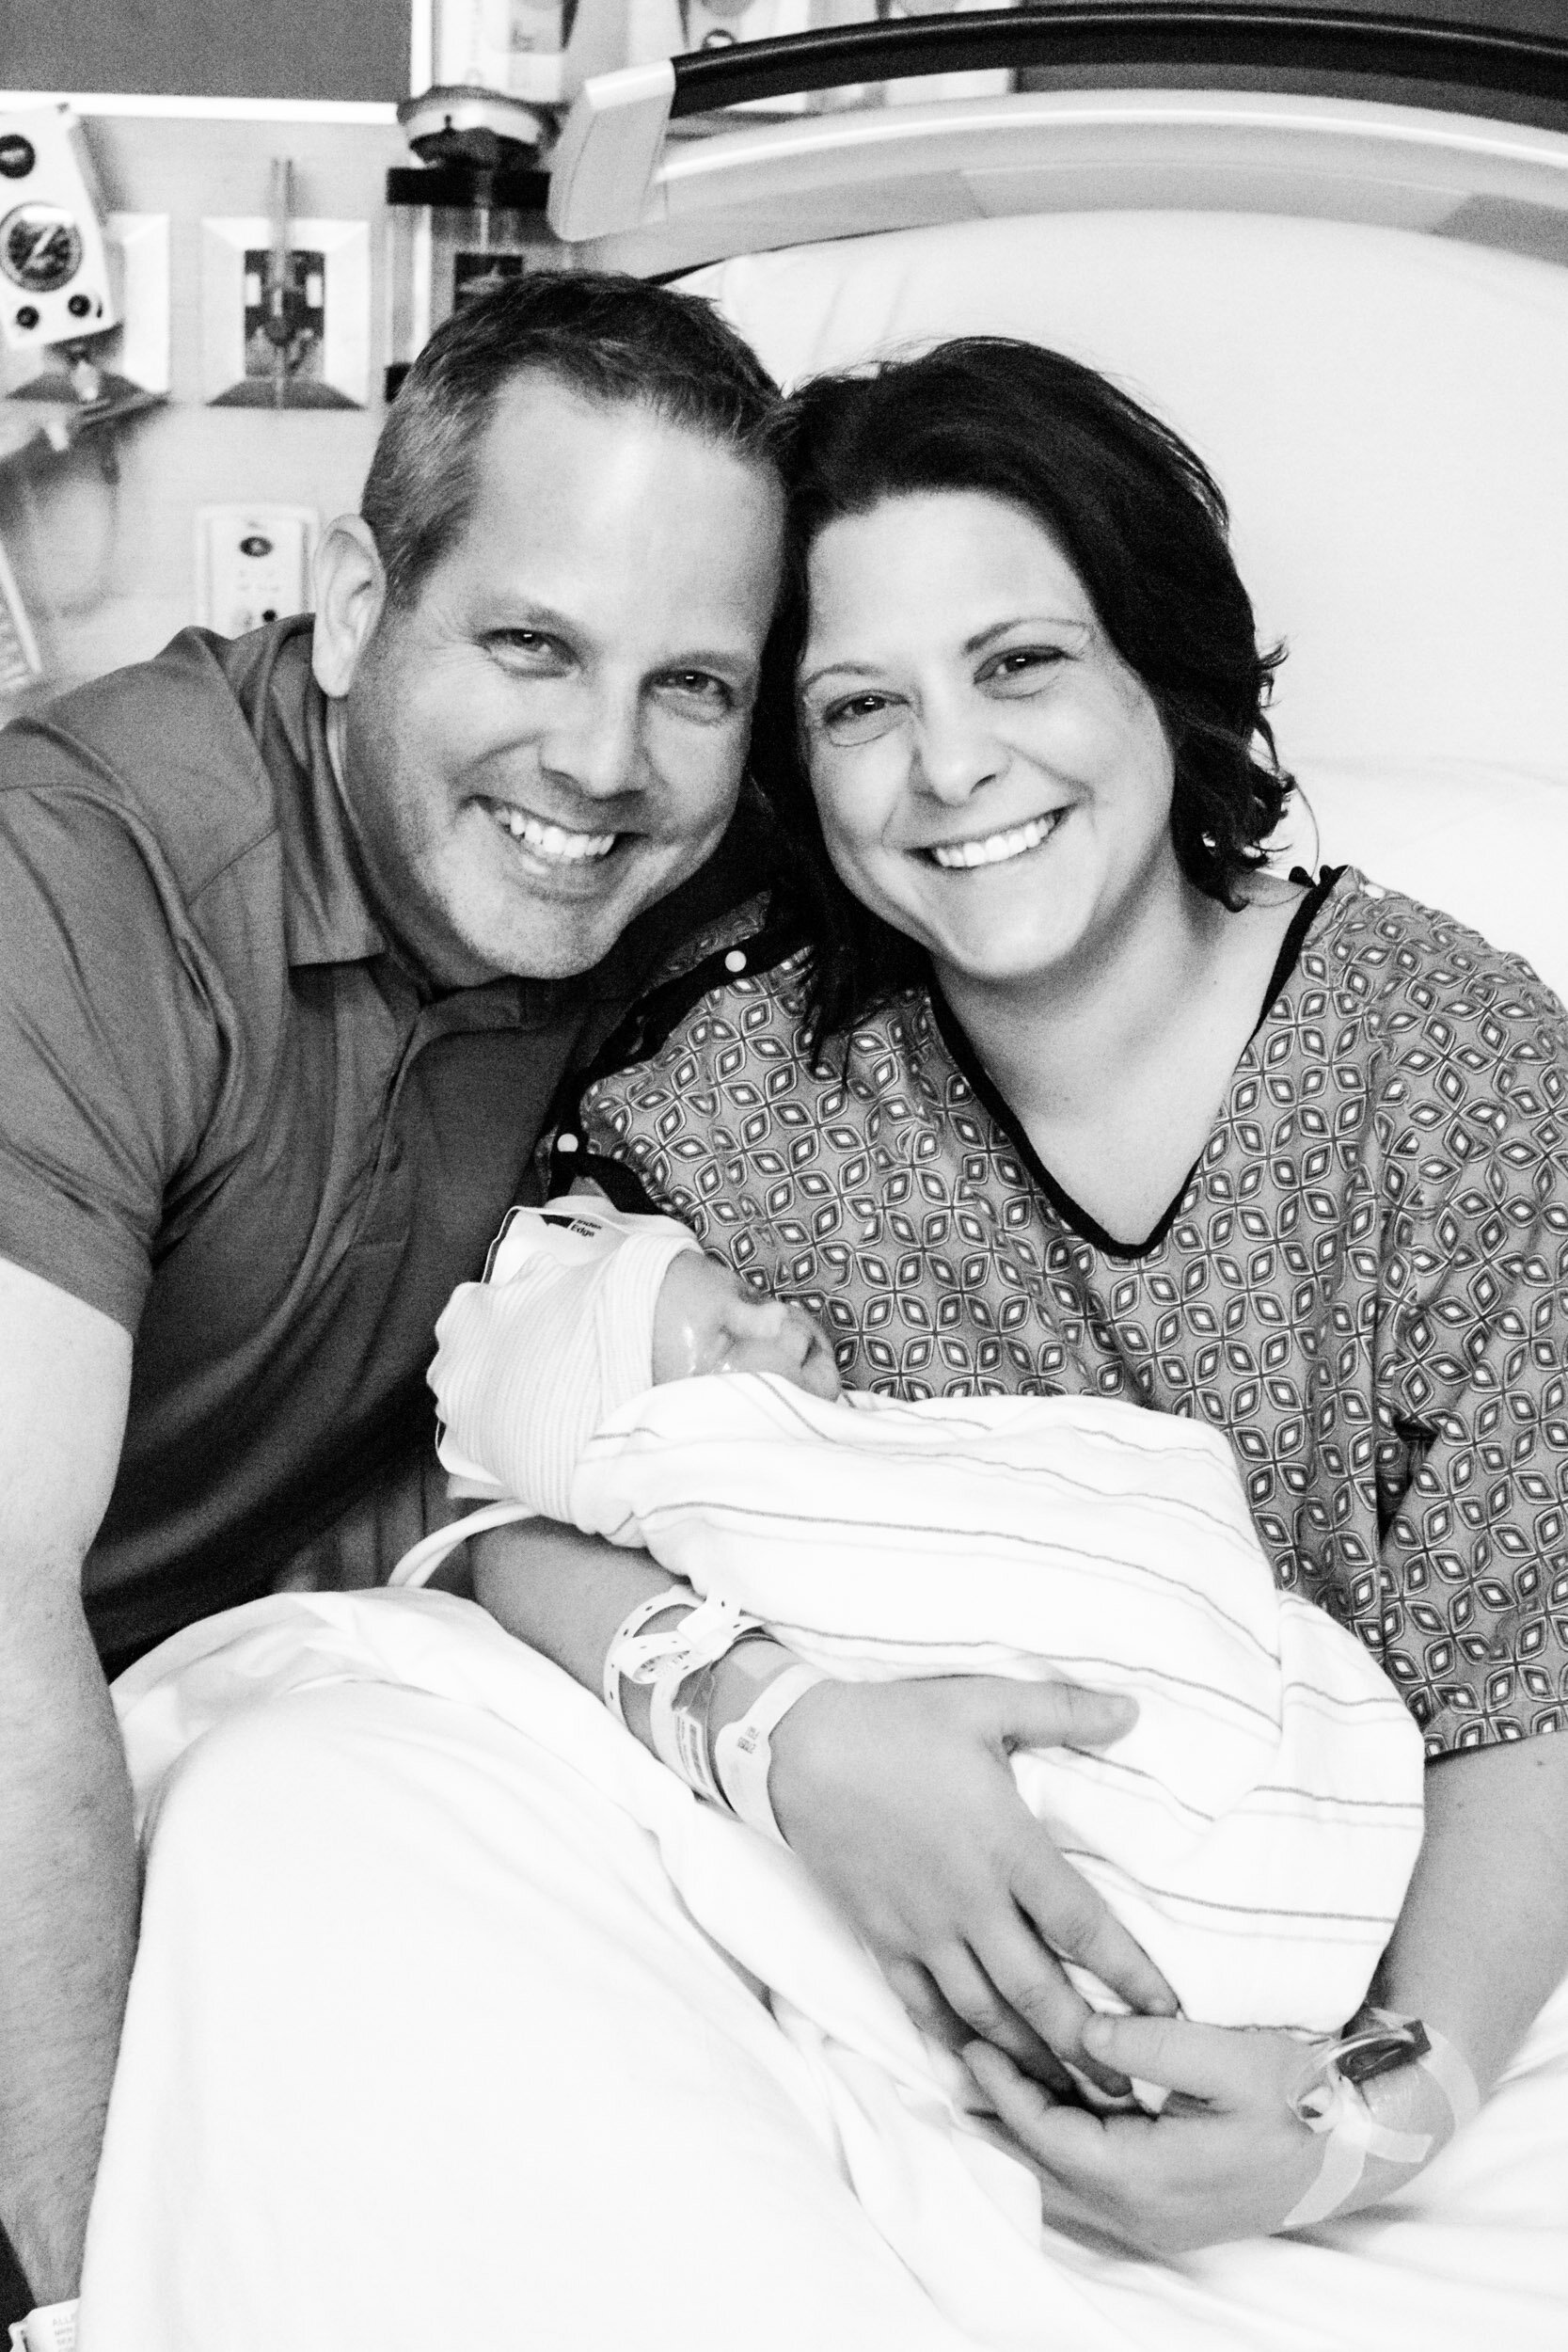 new parents smiling with their baby girl just after birth